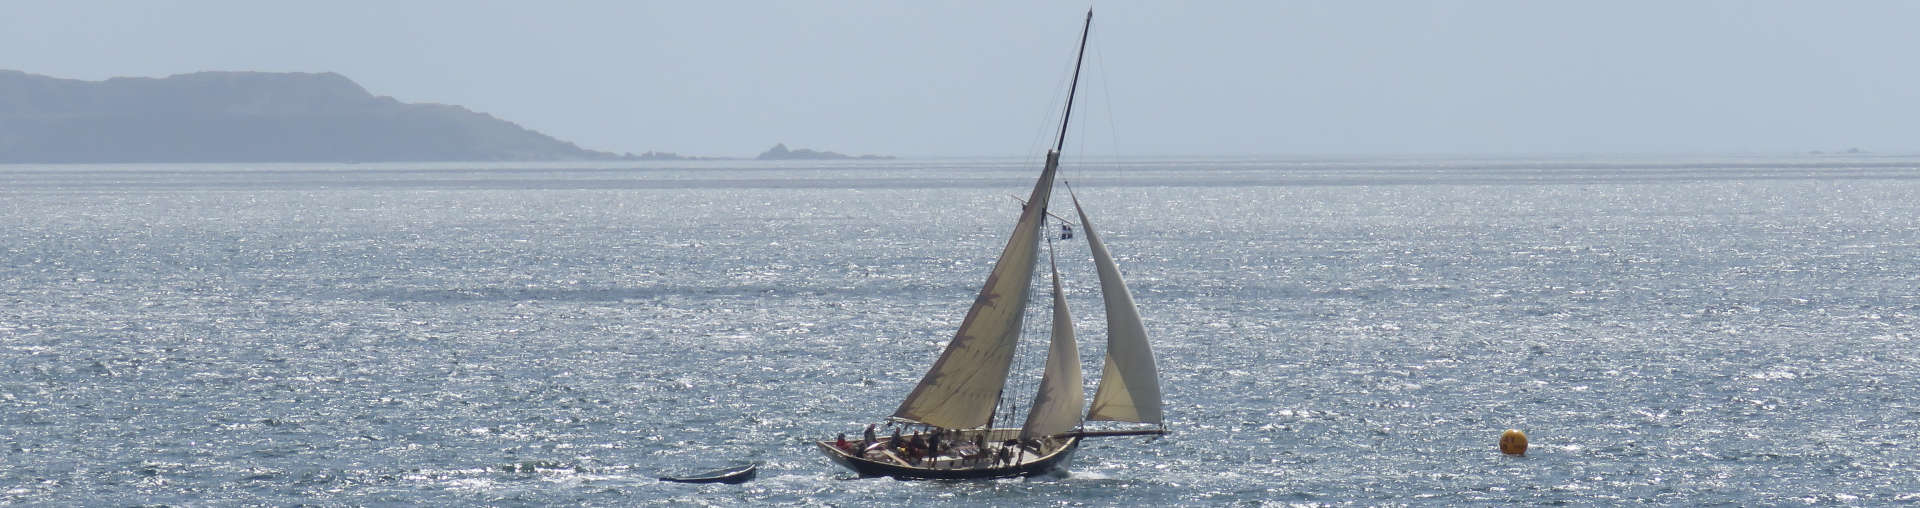 Sailing to the Isles of Scilly - Classic Sailing